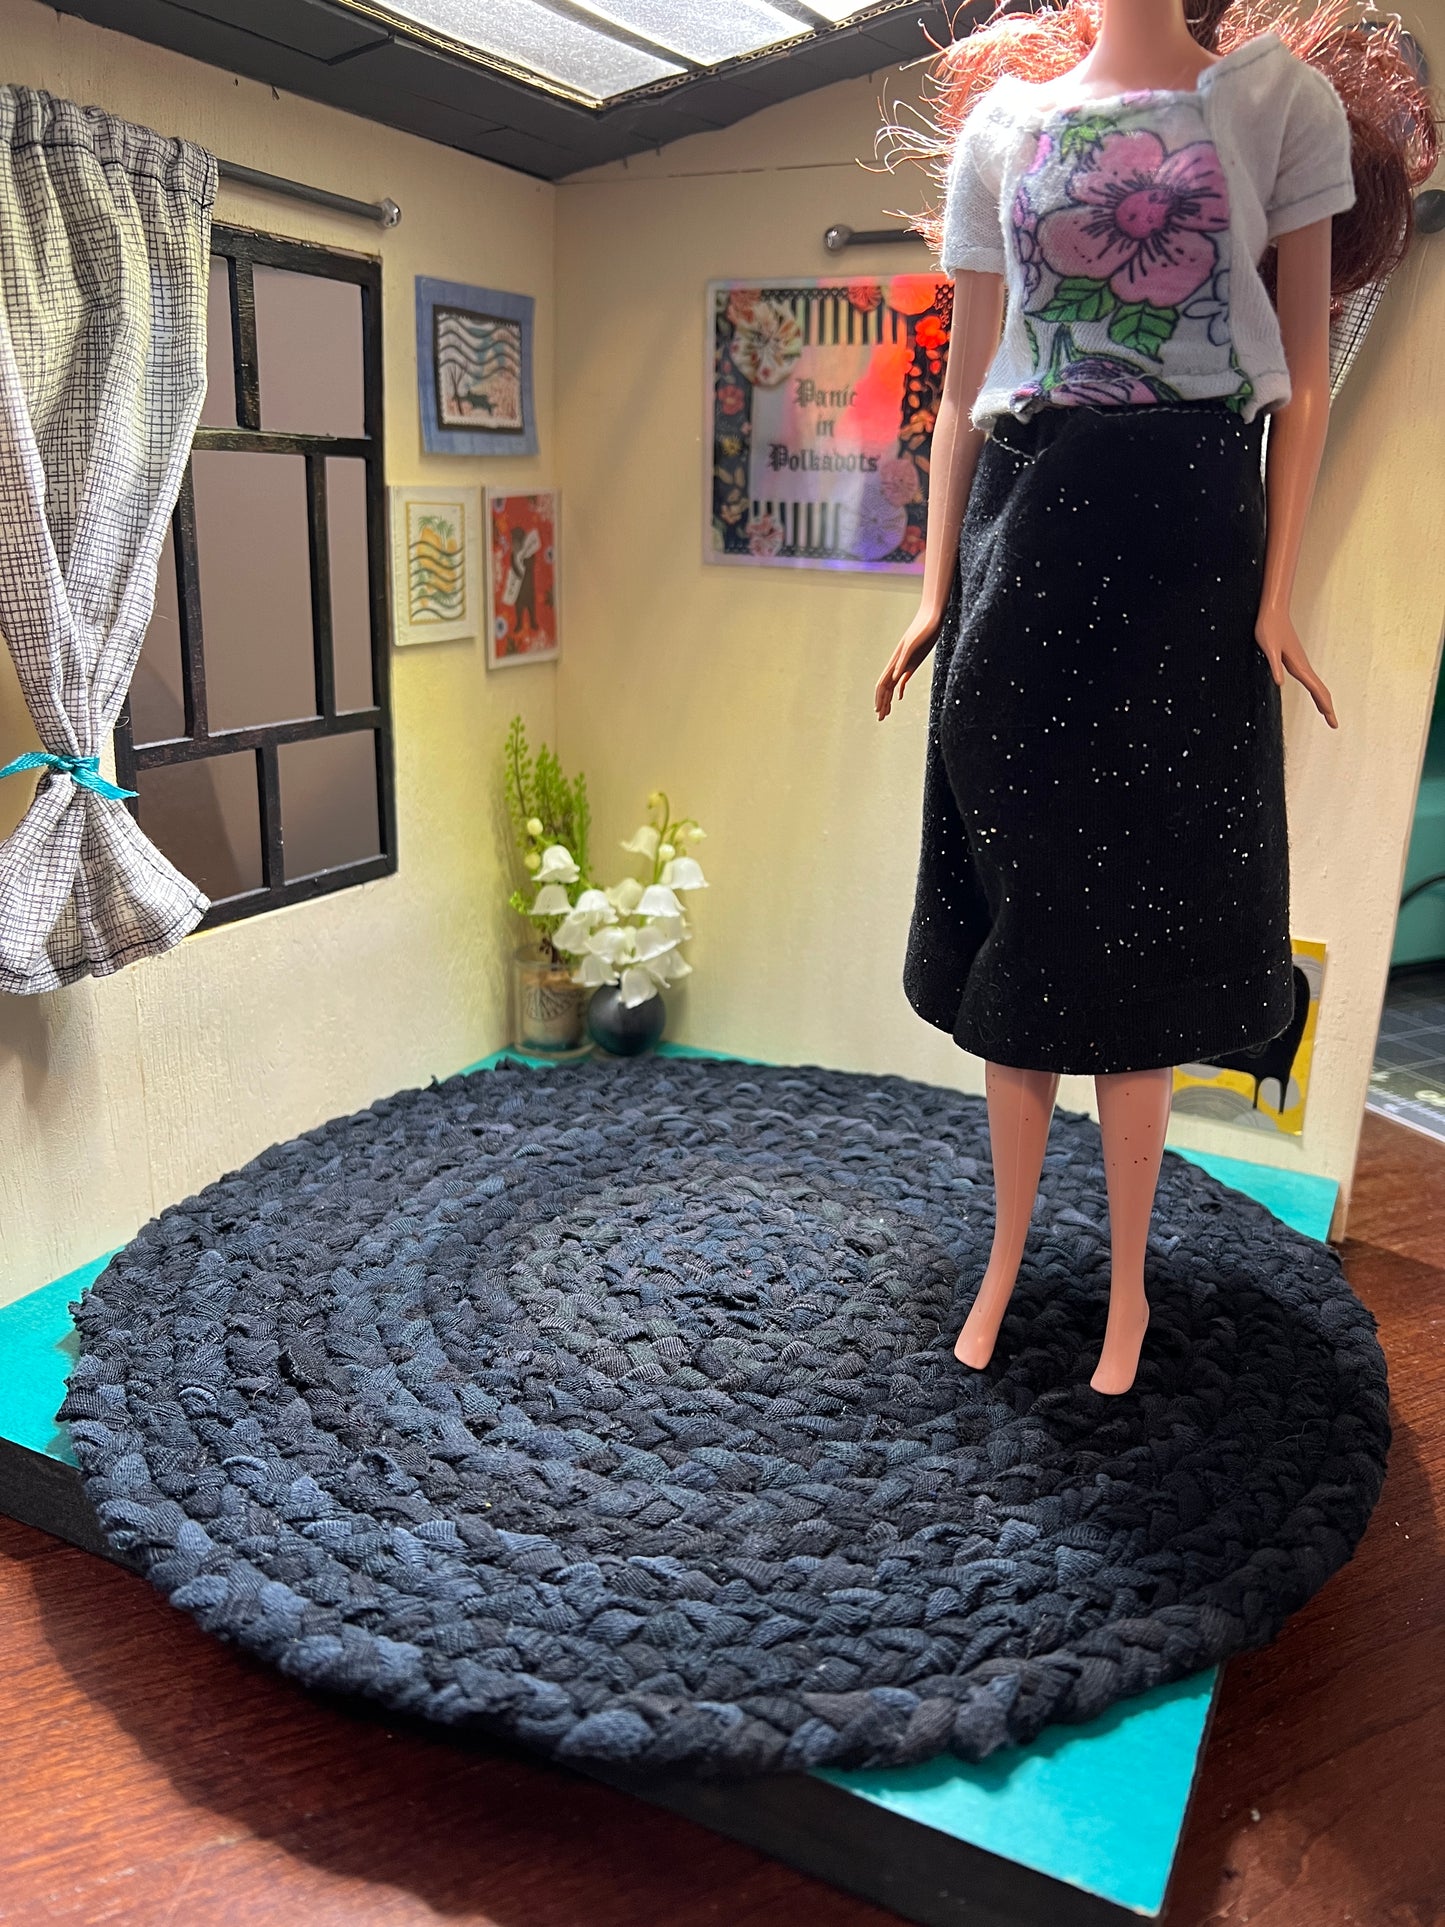 view of miniature rug in a room box, with Barbie standing atop the 11" all black rug for scale and display ideas